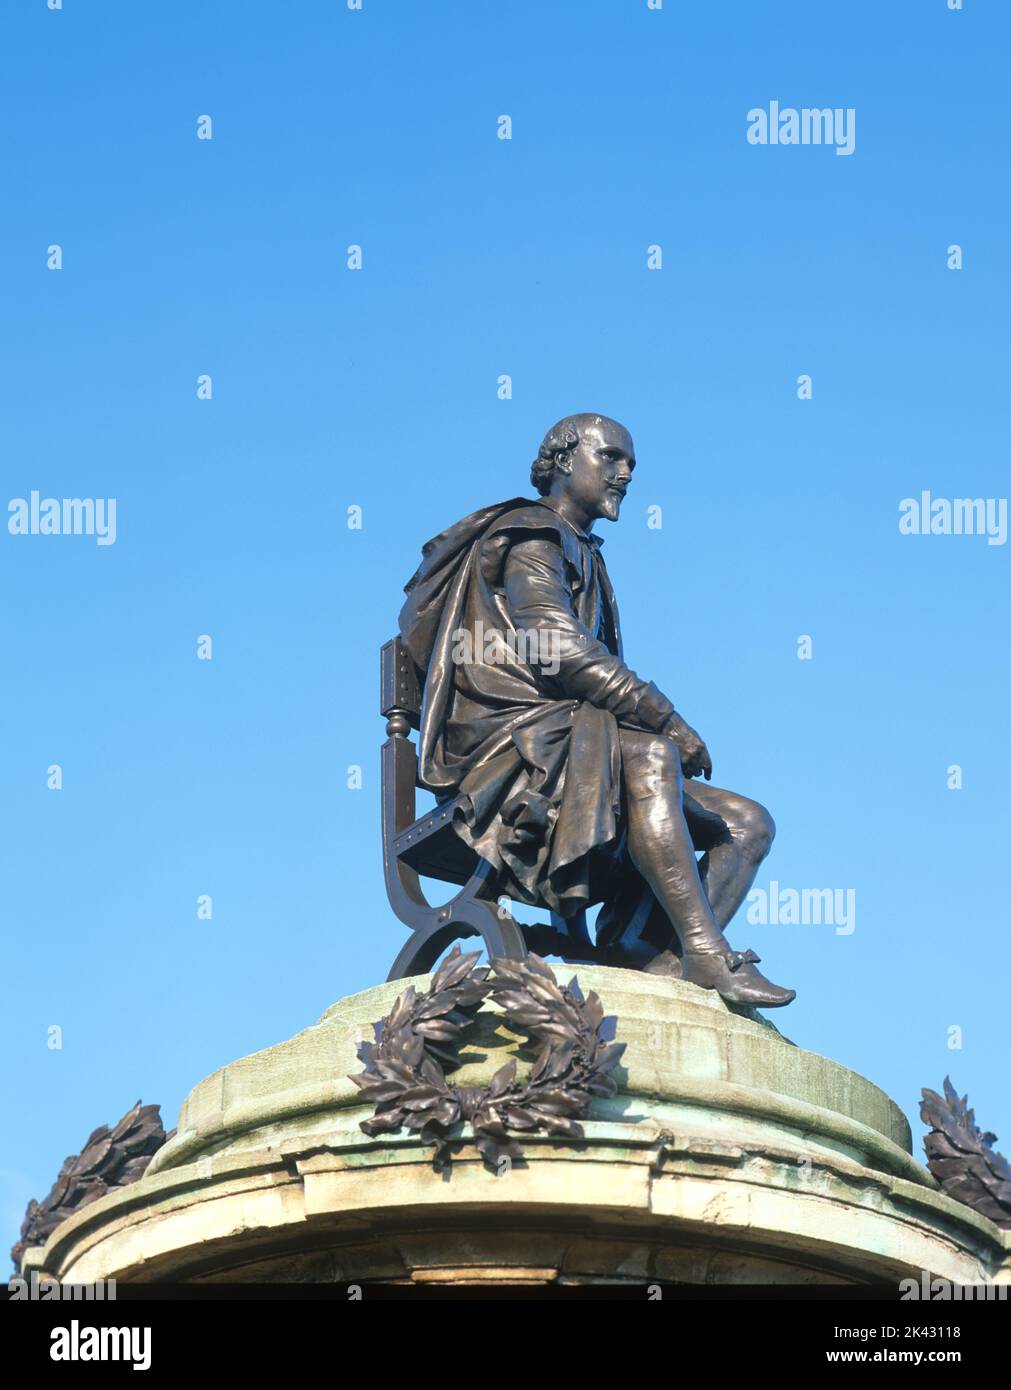 England, Warwickshire,  Stratford-Upon-Avon, statue of William Shakespear, famous poet, playright and author. Stock Photo